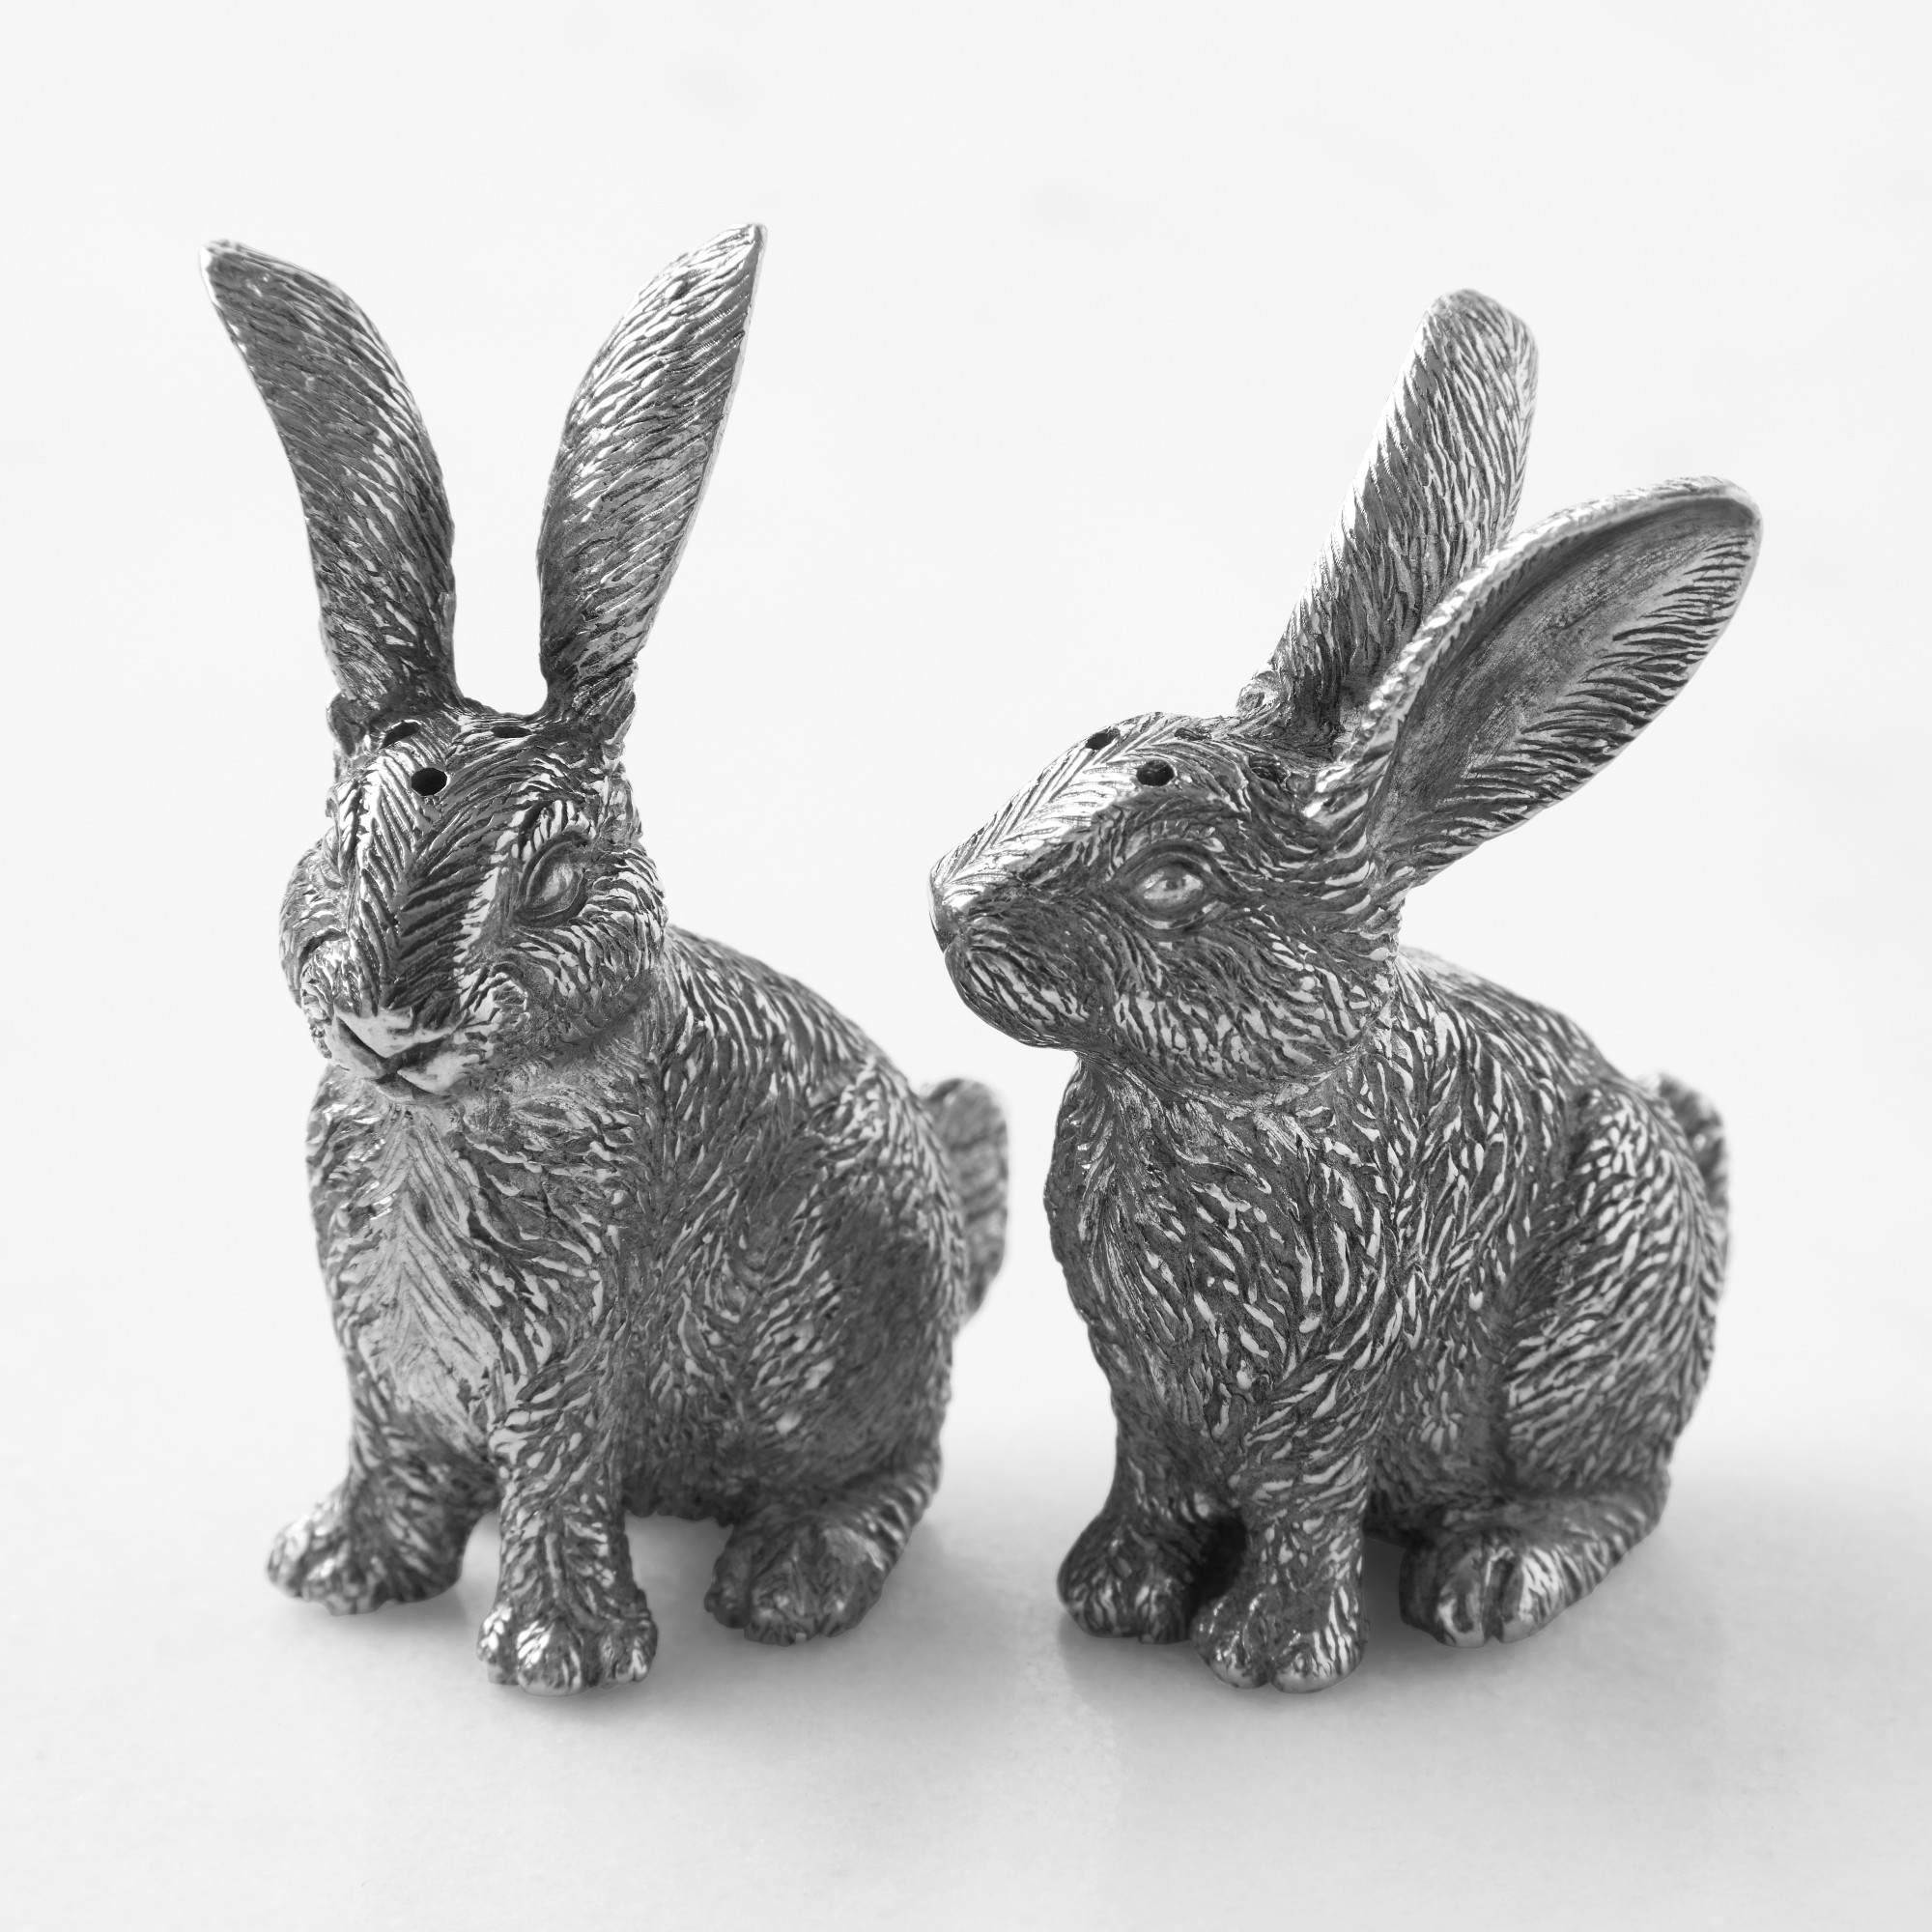 Pewter Bunny Salt and Pepper Shakers